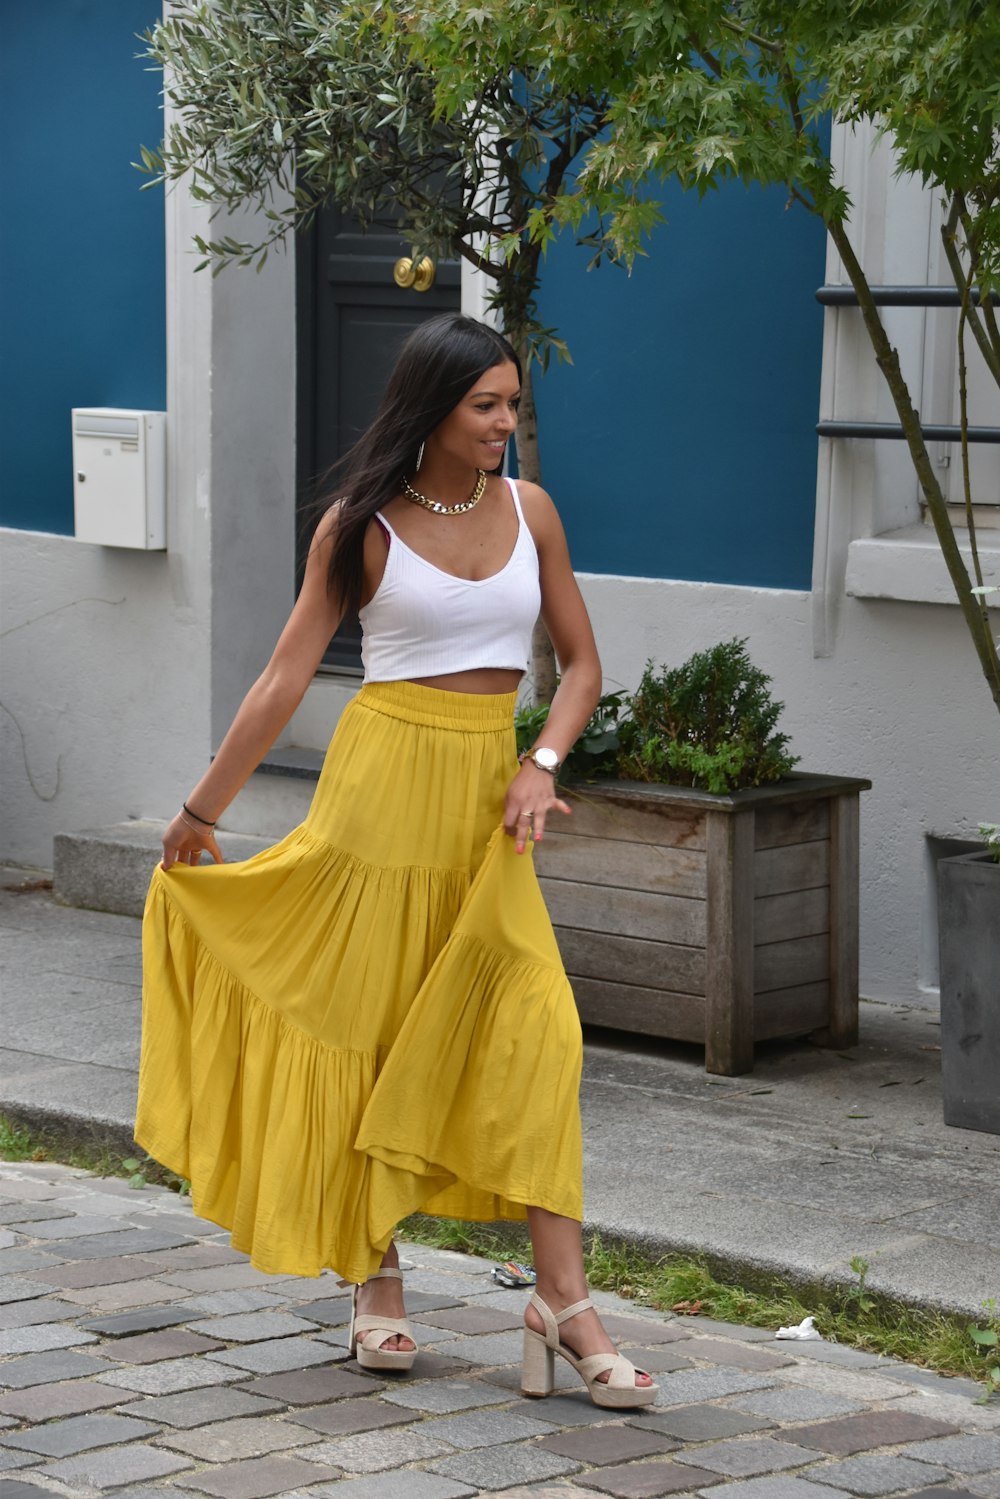 Woman in white tank top and yellow skirt standing on gray concrete floor  during daytime photo – Free Rue crémieux Image on Unsplash